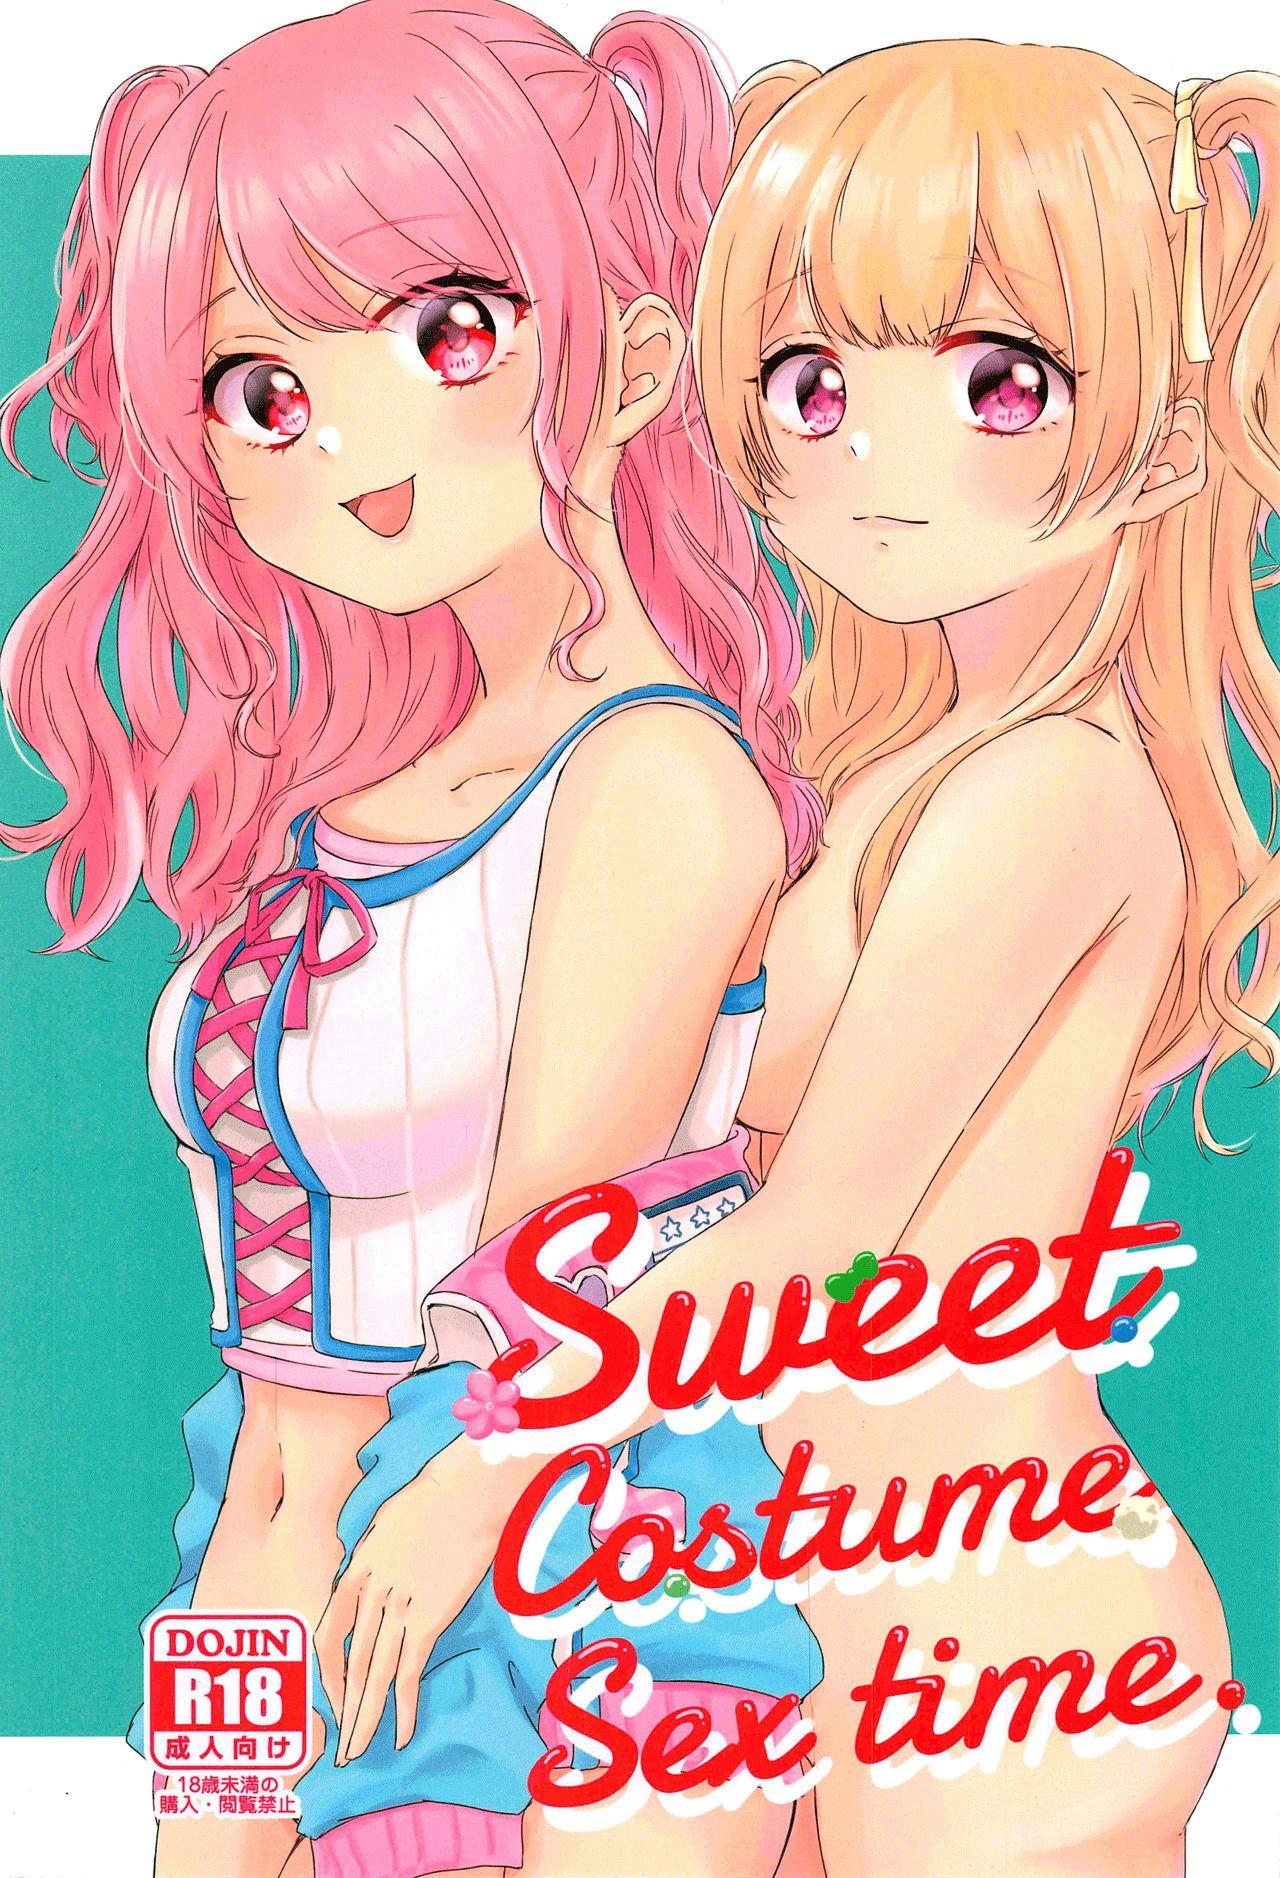 Fetish Sweet Costume Sex time. - Bang dream Hugecock - Page 2